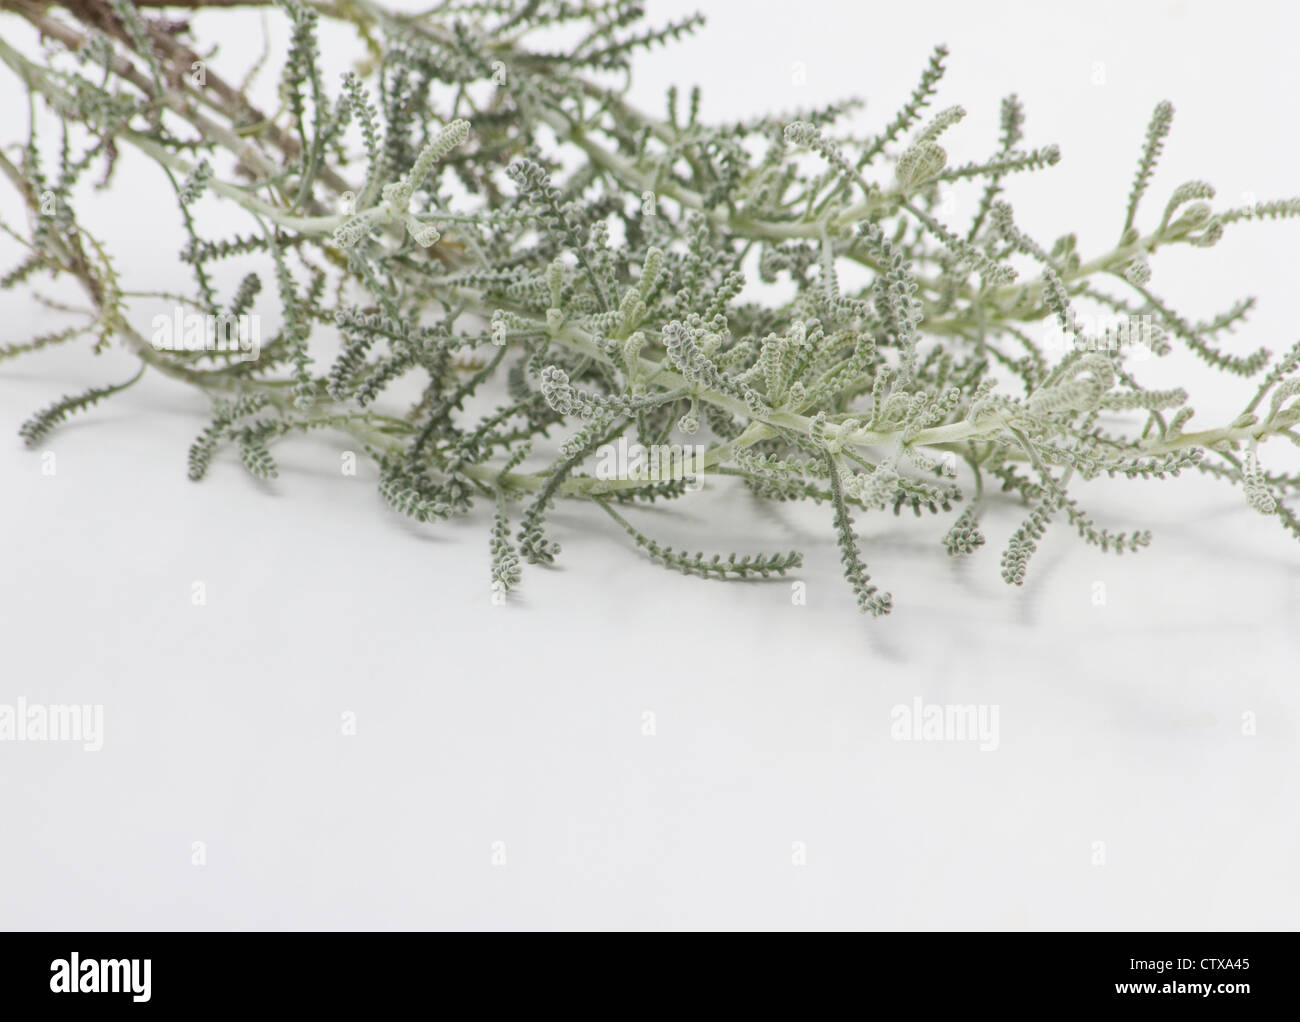 Cotton lavender branches and leaves (Santolina chamaecyparissus) on white background Stock Photo